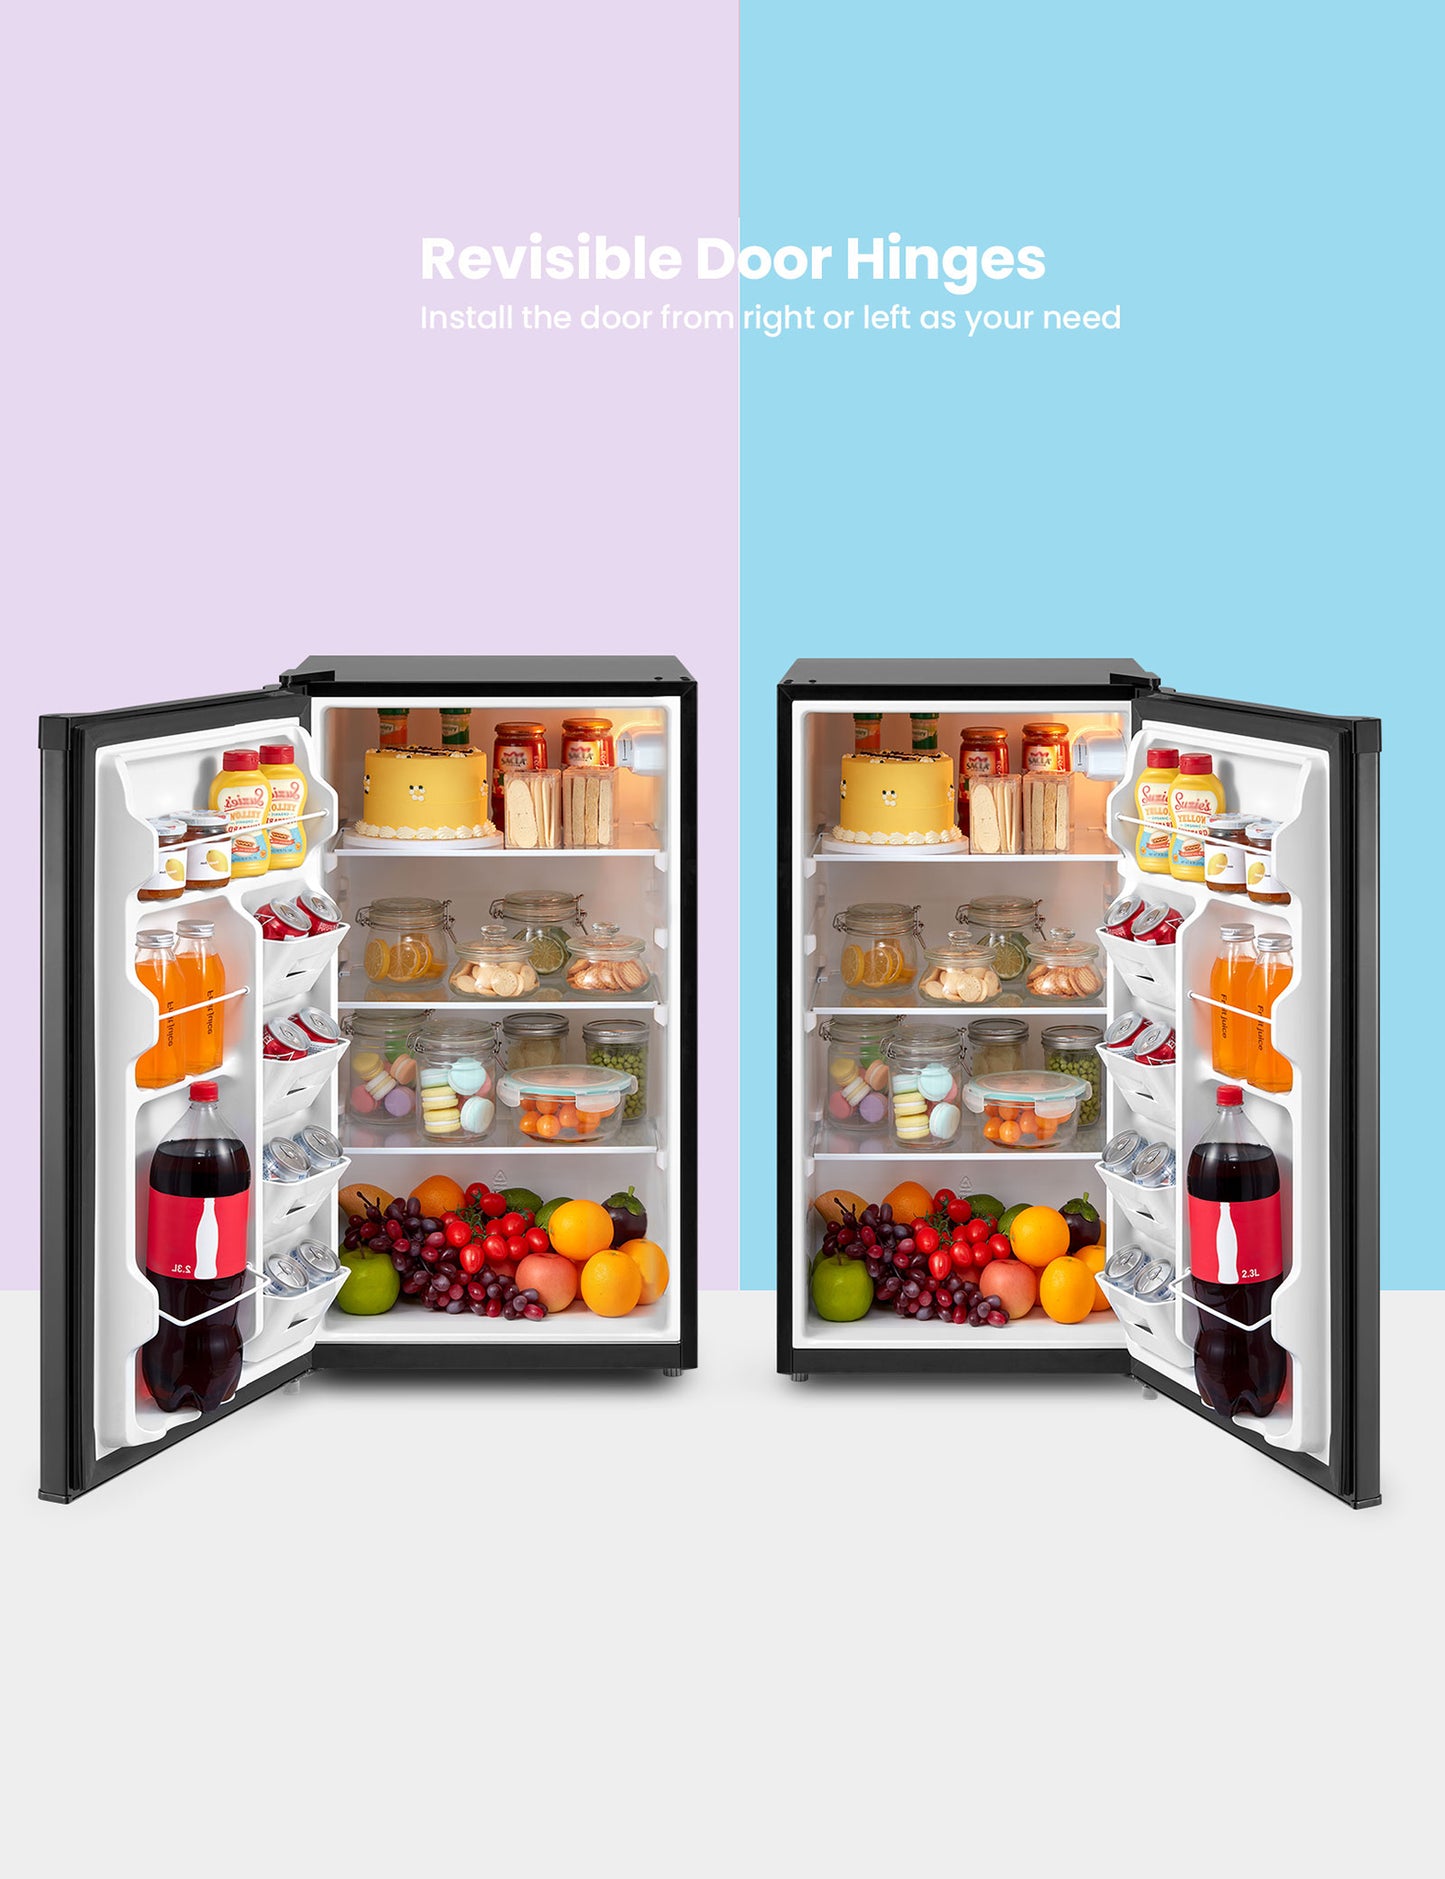 revisible door hinges with opened black refrigerator